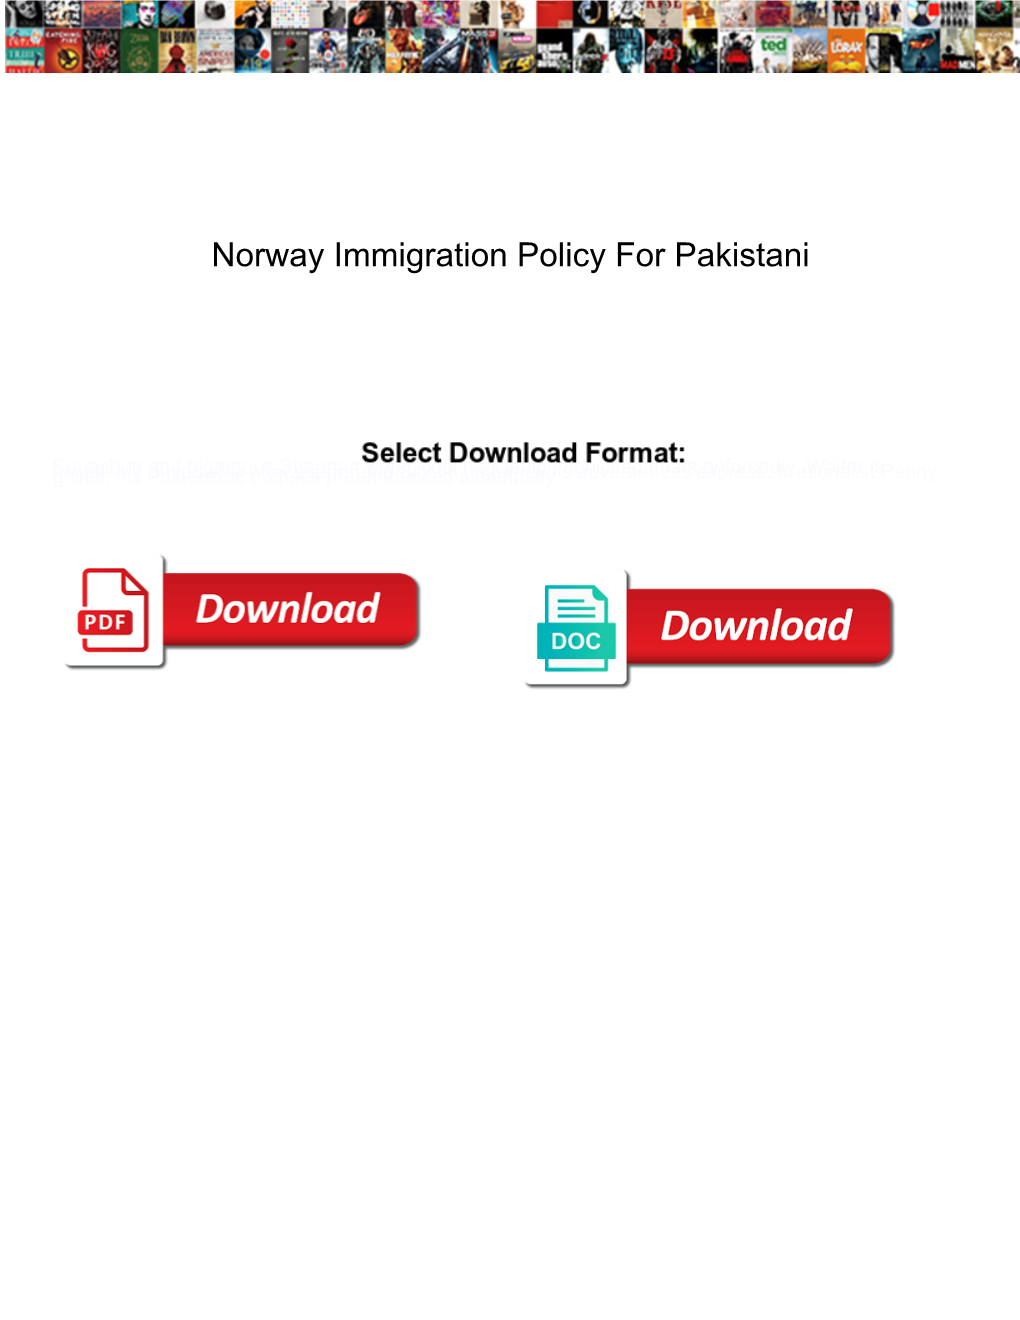 Norway Immigration Policy for Pakistani